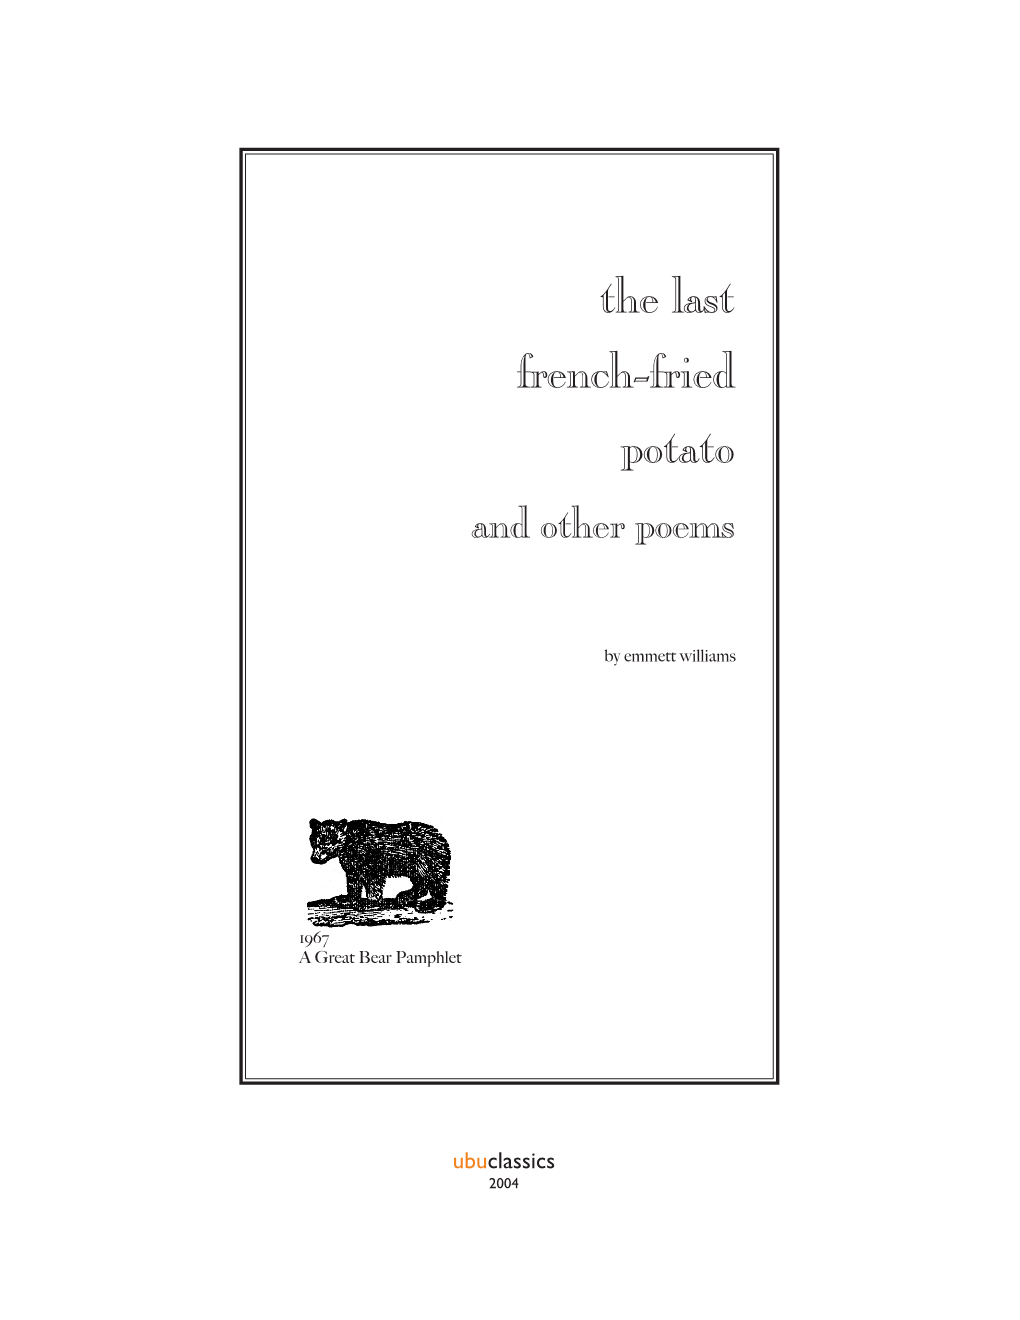 Emmett Williams, the Last French-Fried Potato and Other Poems